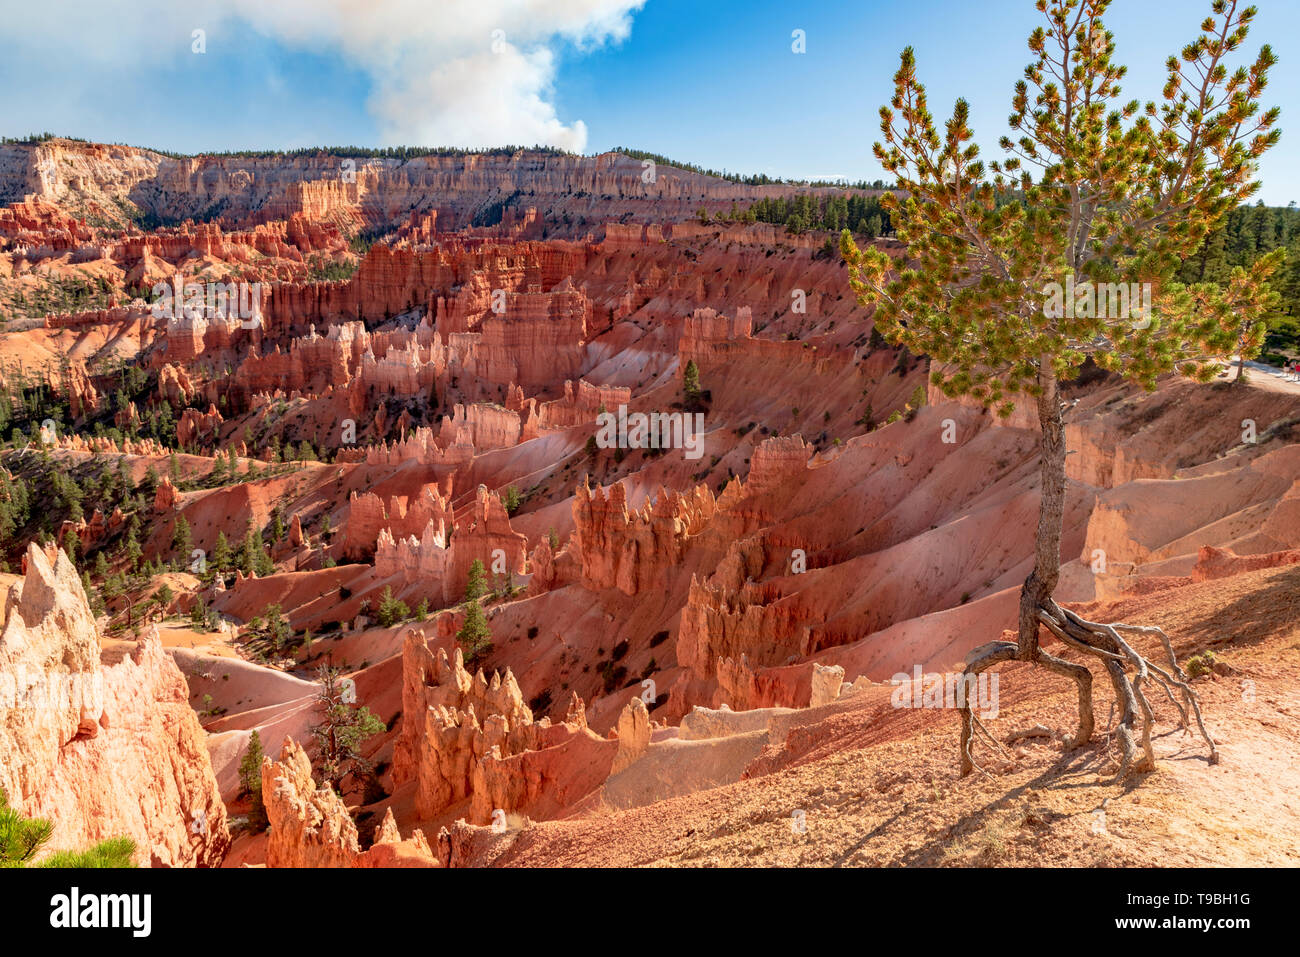 Single tree viewing from Sunrise Point,Bryce canyon national park, Utah, United States Stock Photo